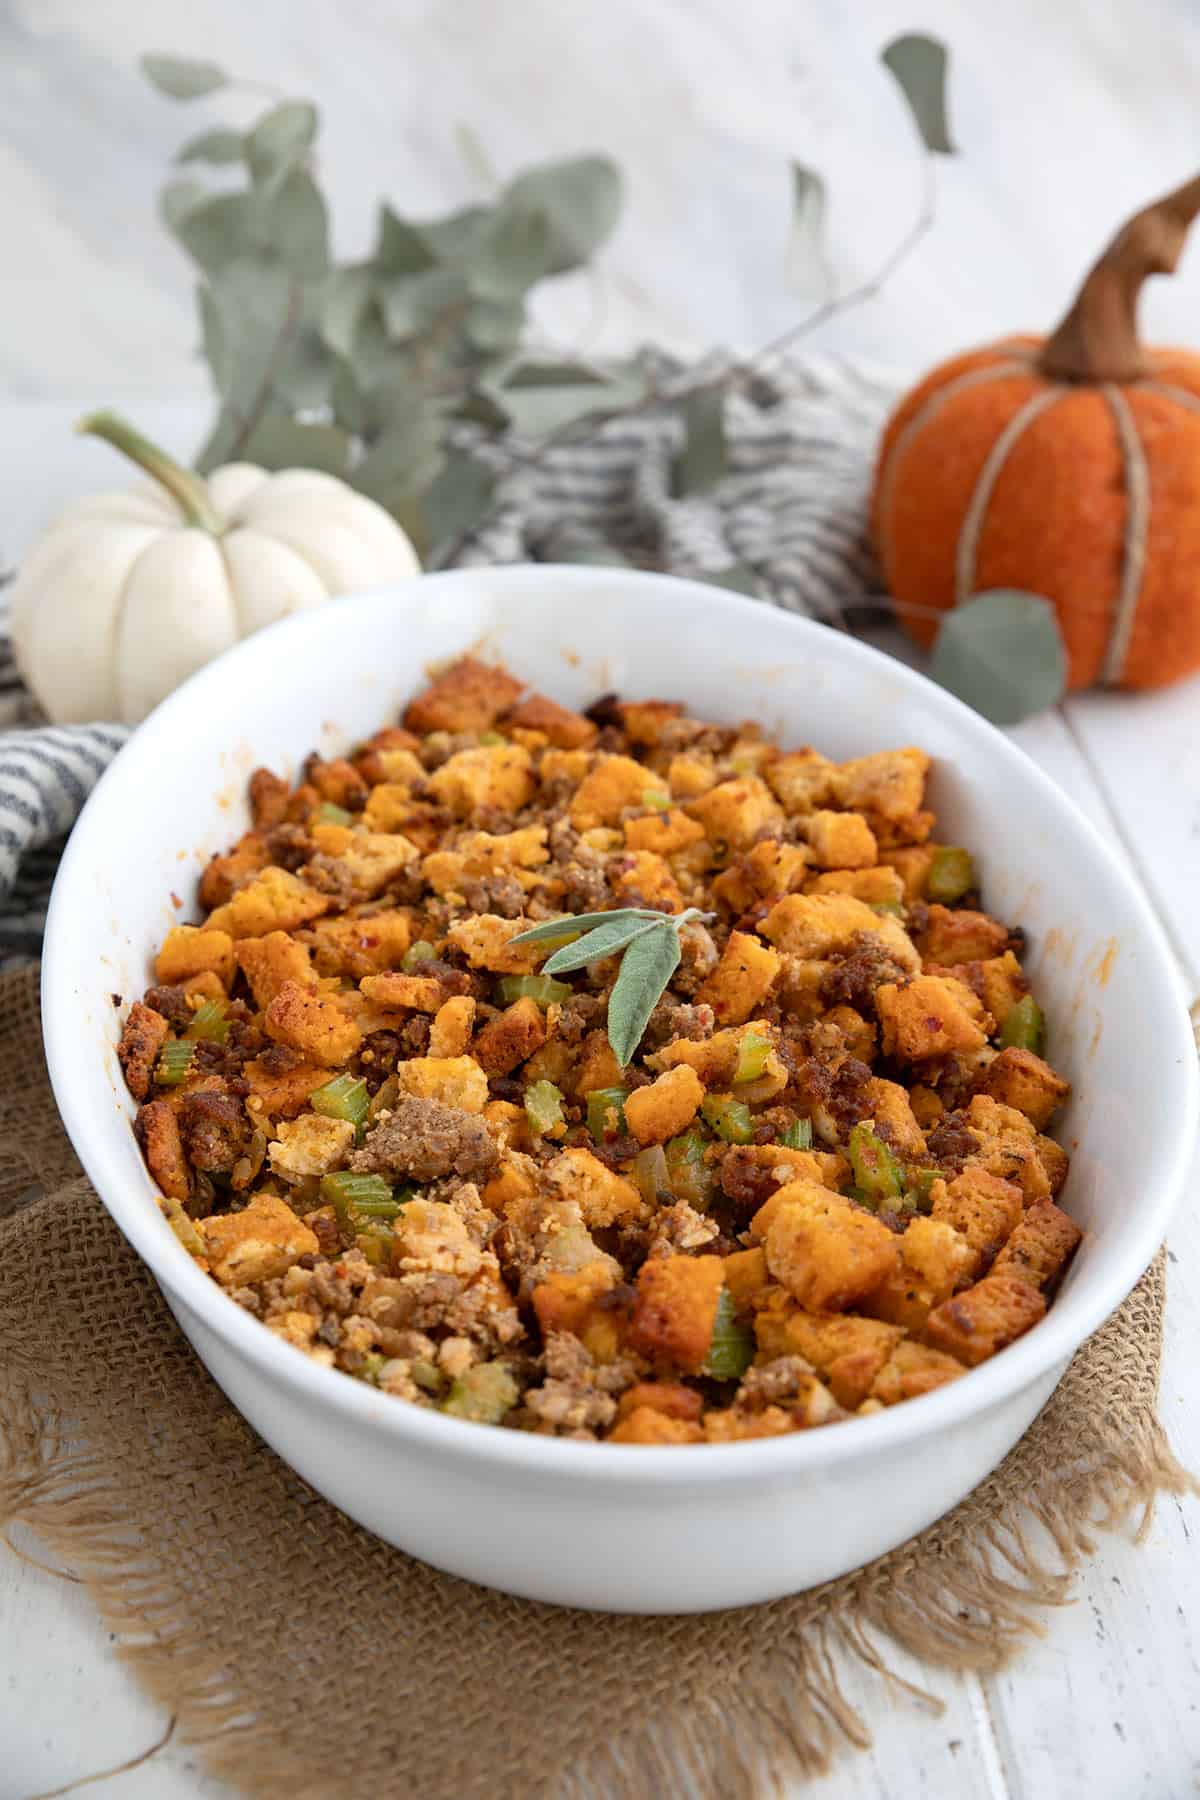 Keto Stuffing in an oval baking dish in front of pumpkins and Thanksgiving decorations.